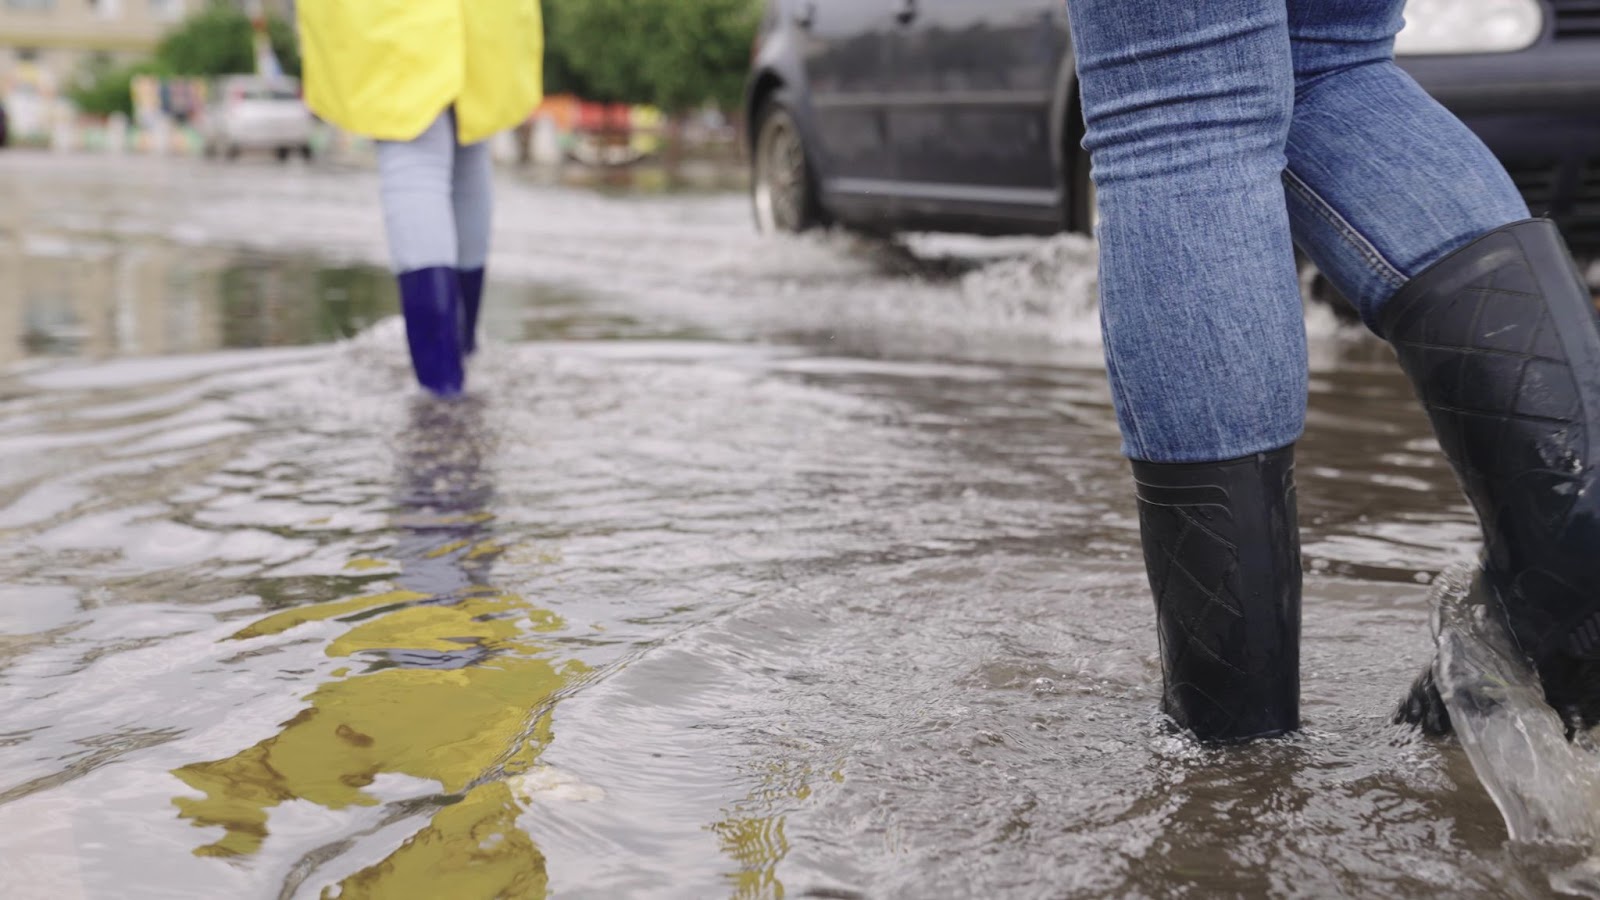 Two individuals in rain boots navigating a flooded street amidst flood damage and mold